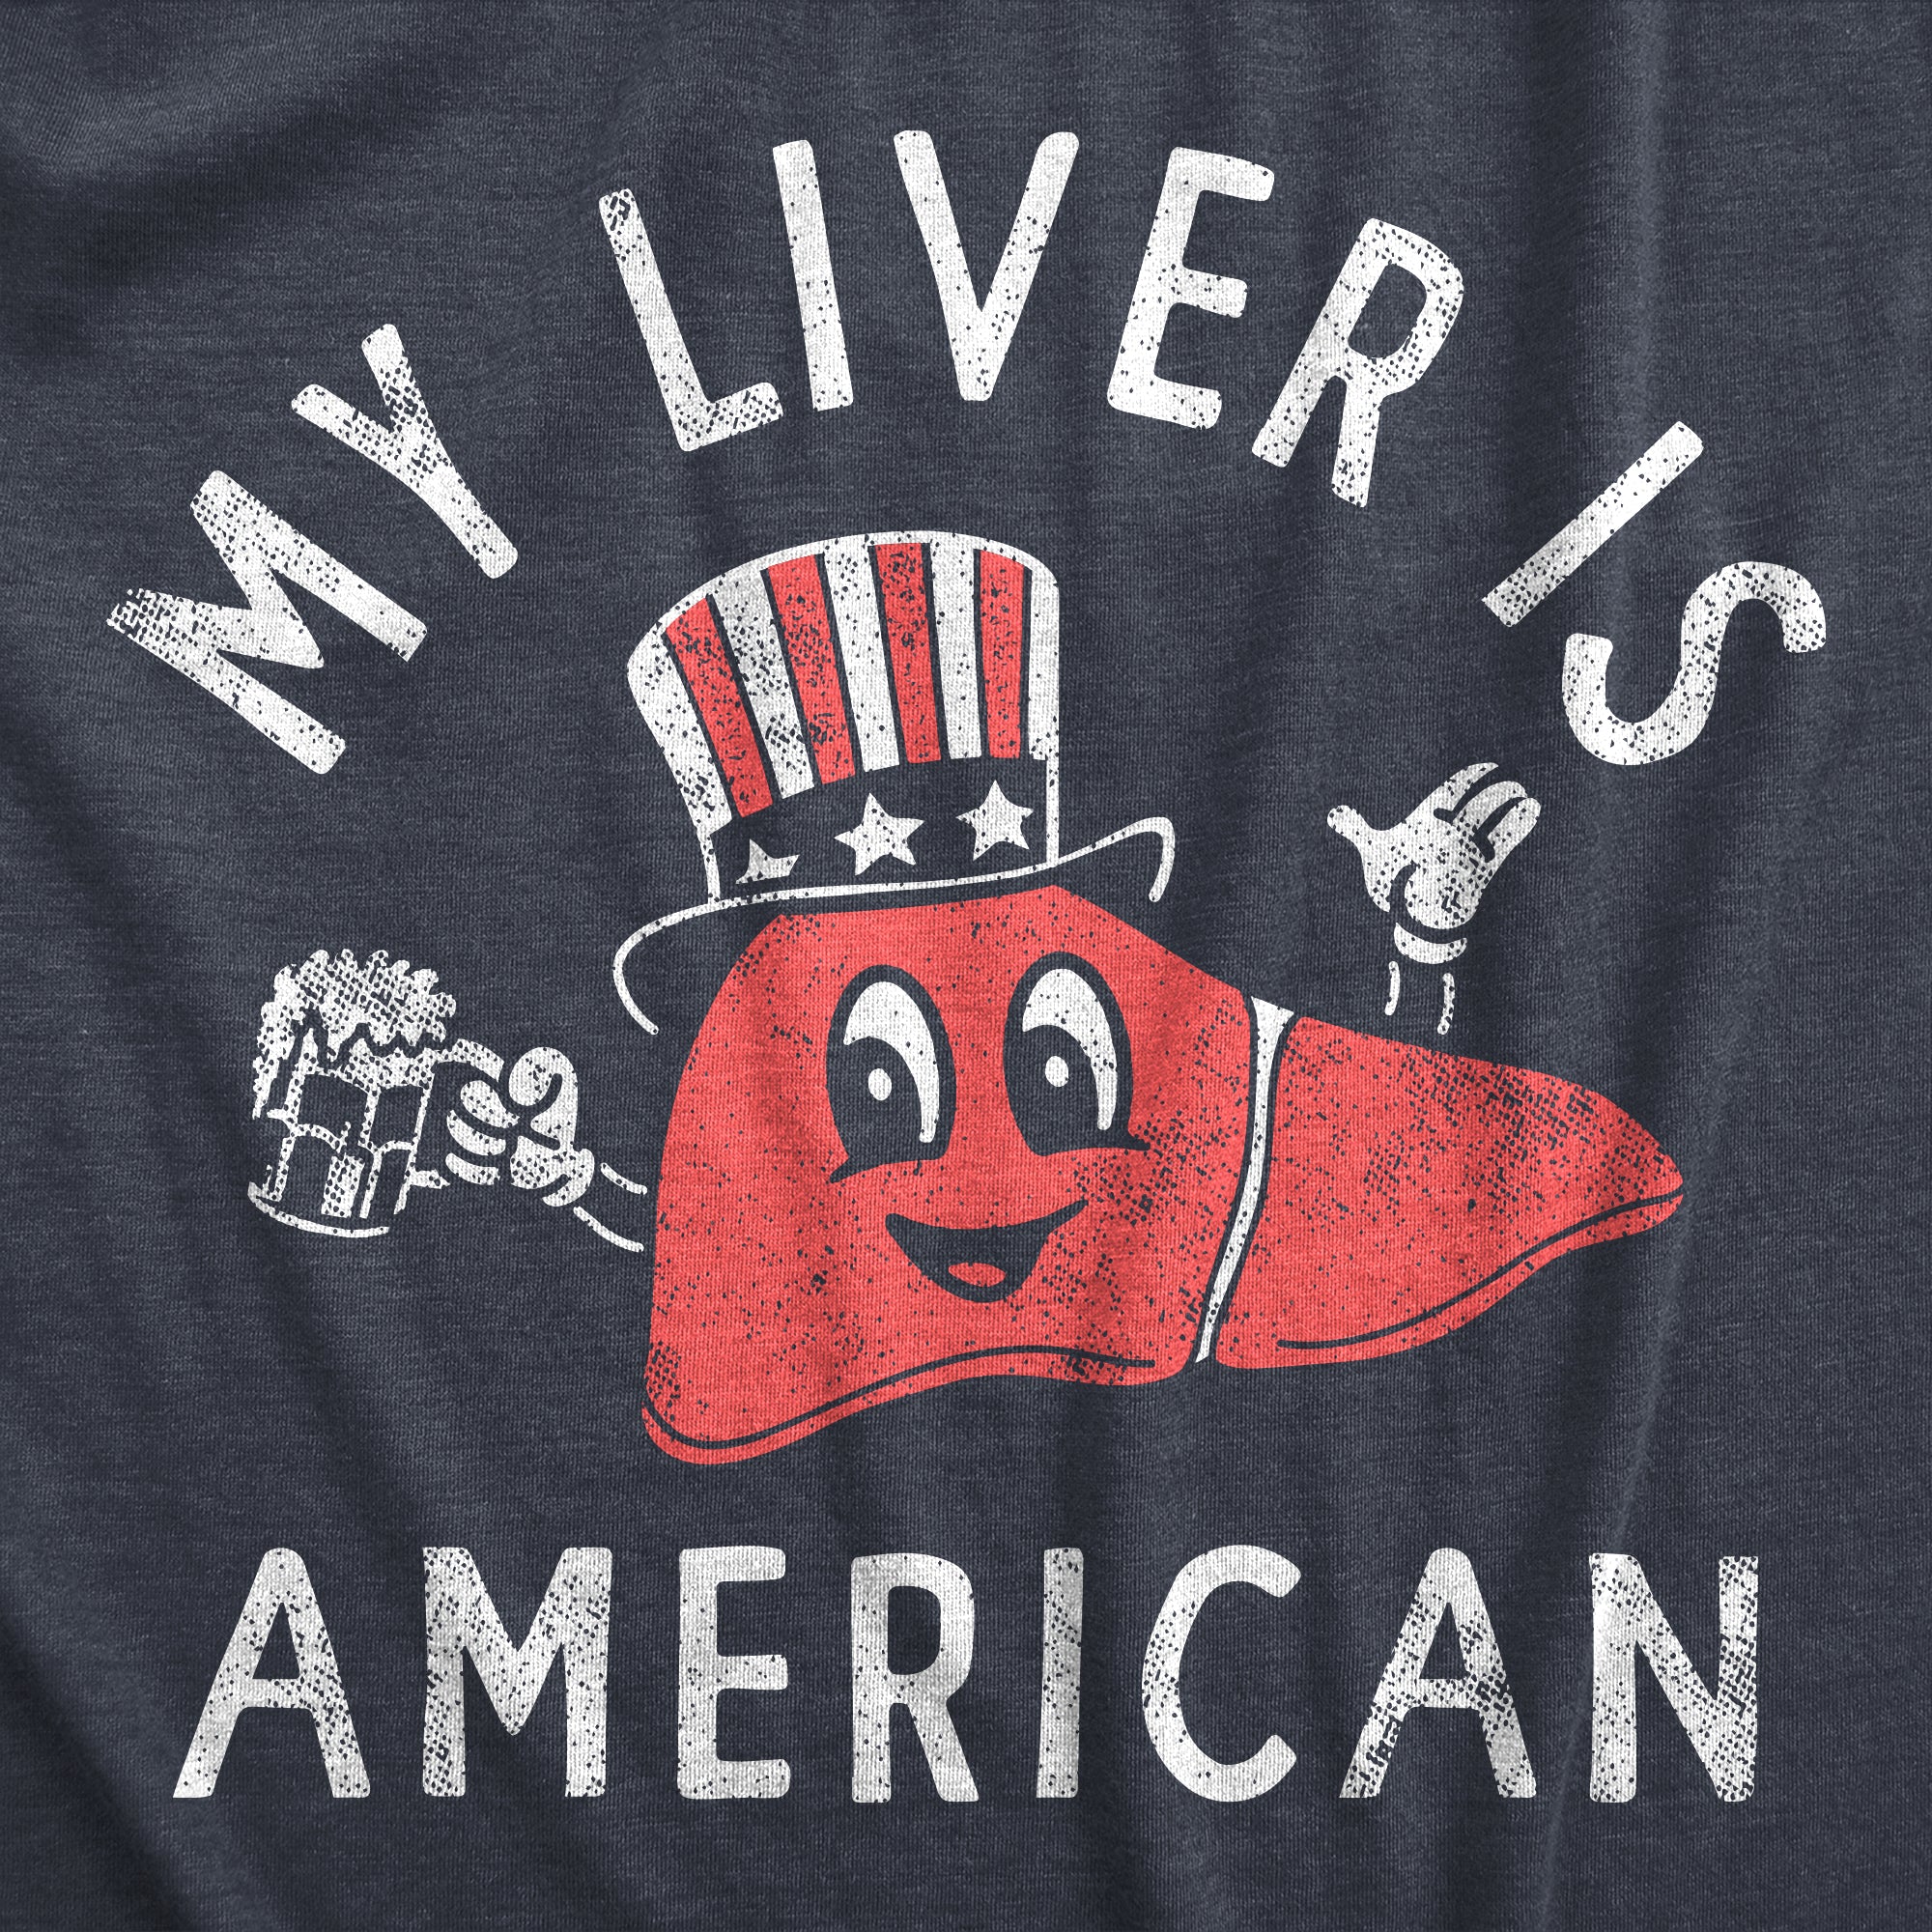 Funny Heather Navy - LIVER My Liver Is American Mens T Shirt Nerdy Fourth Of July Drinking Tee